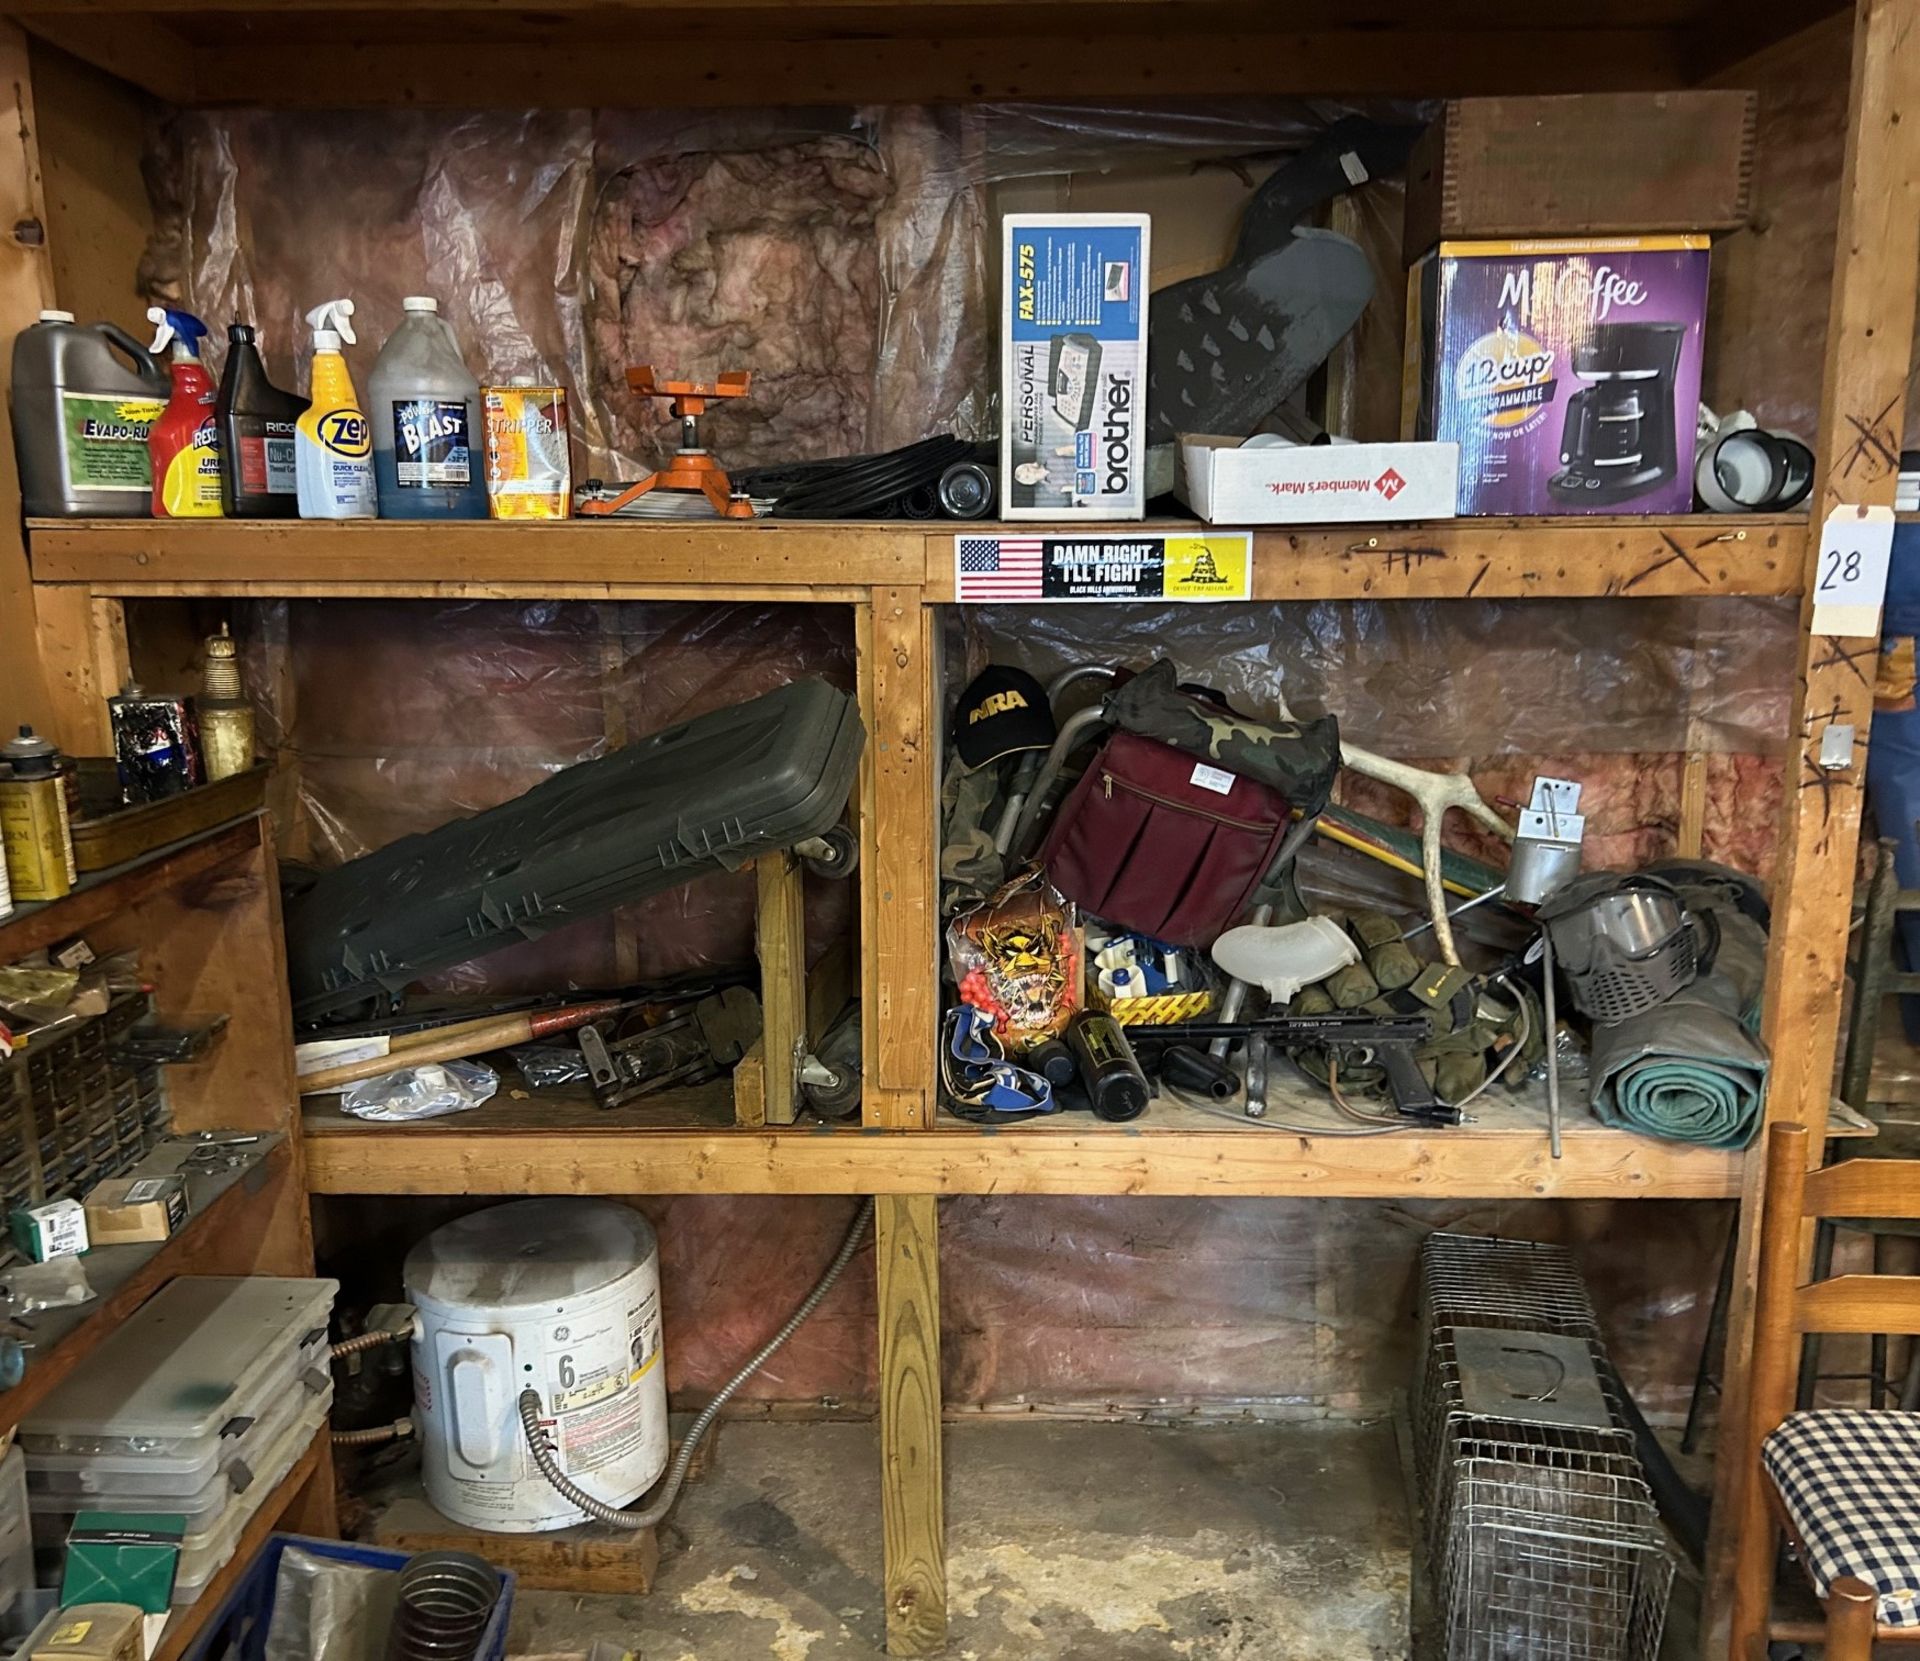 Contents of Wooden Shelf, Paint Ball Gun, Jack Stand and other items